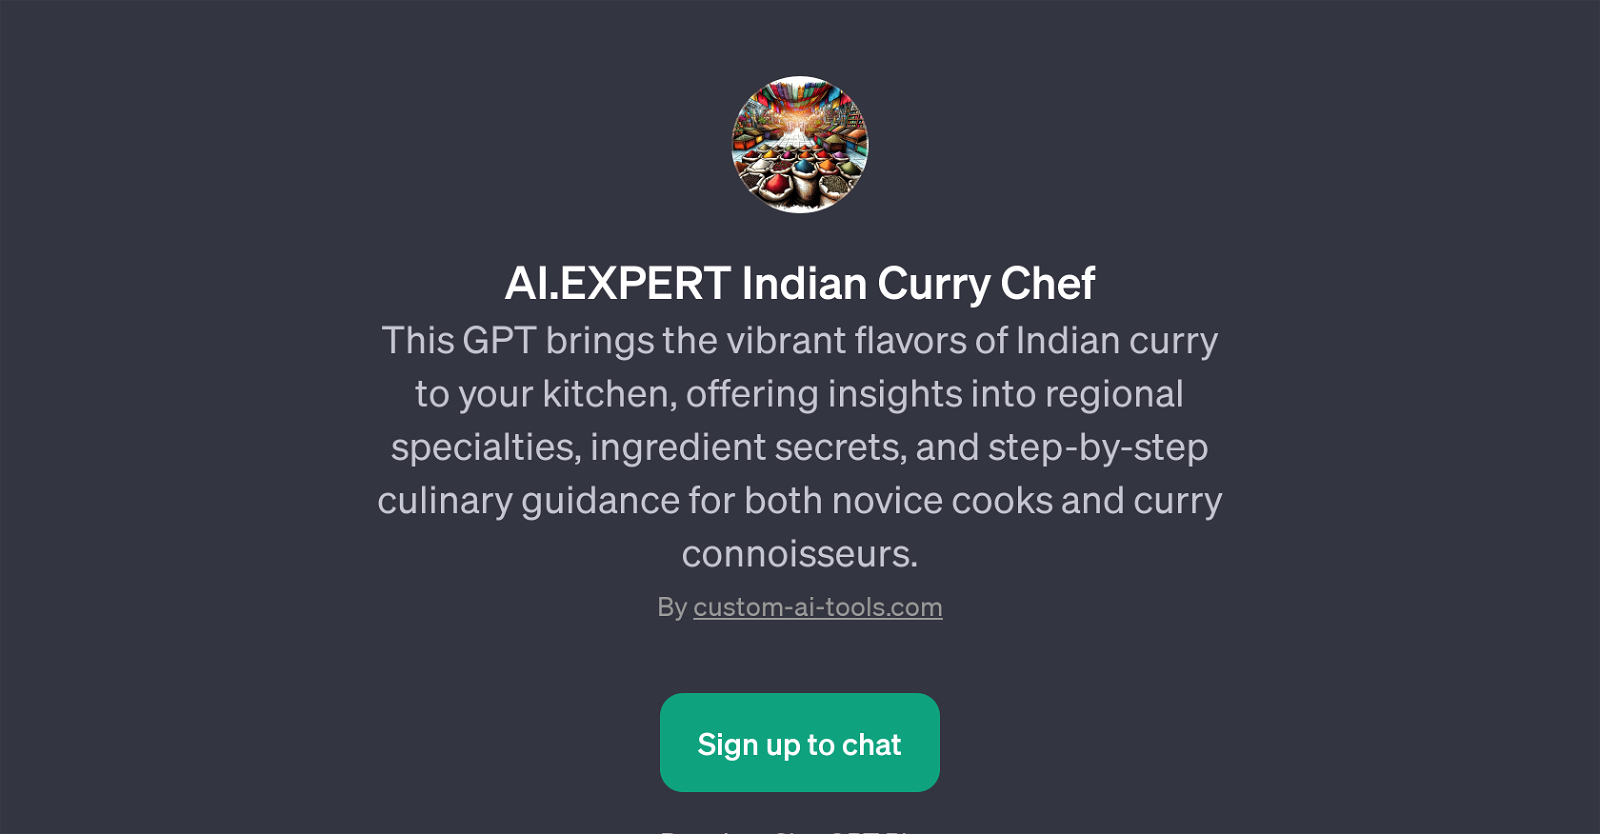 AI.EXPERT Indian Curry Chef website